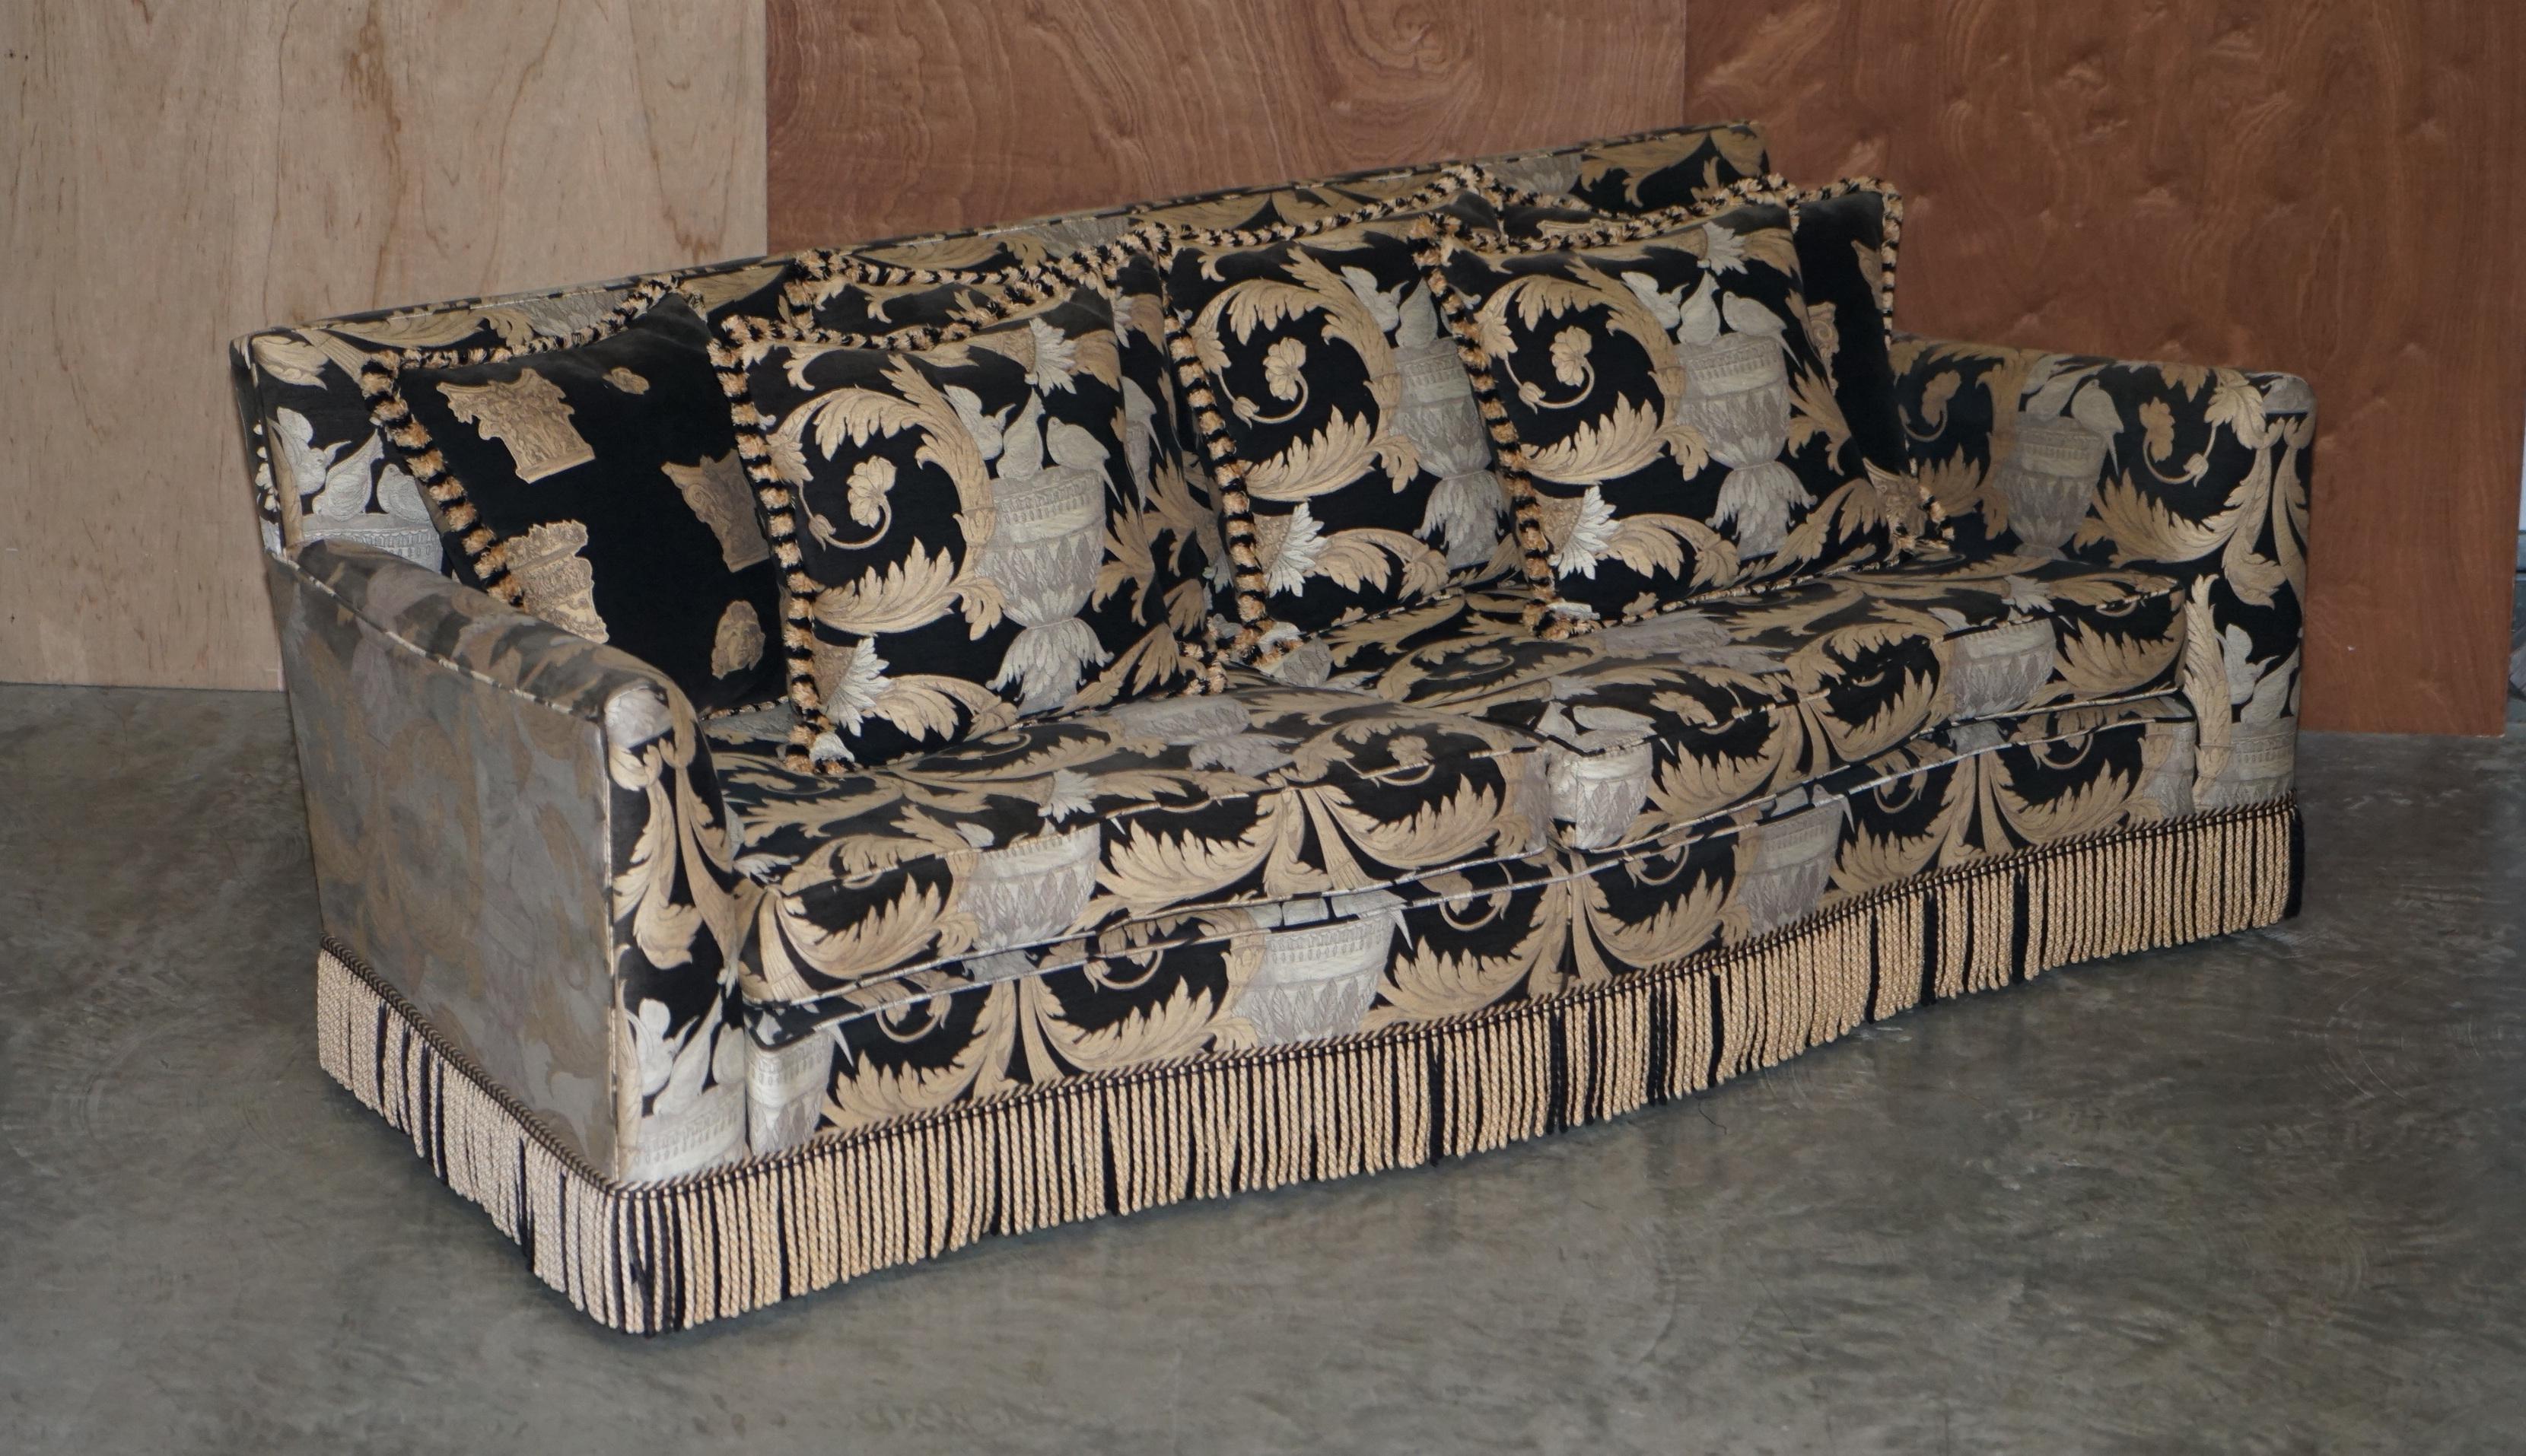 We are delighted to offer for sale this luxury Duresta Diplomat three piece suite piece suite with Versace Italian style upholstery

A very well made and decorative suite. The fabric screams Versace decadence, its so Italain, I absolutely love it,